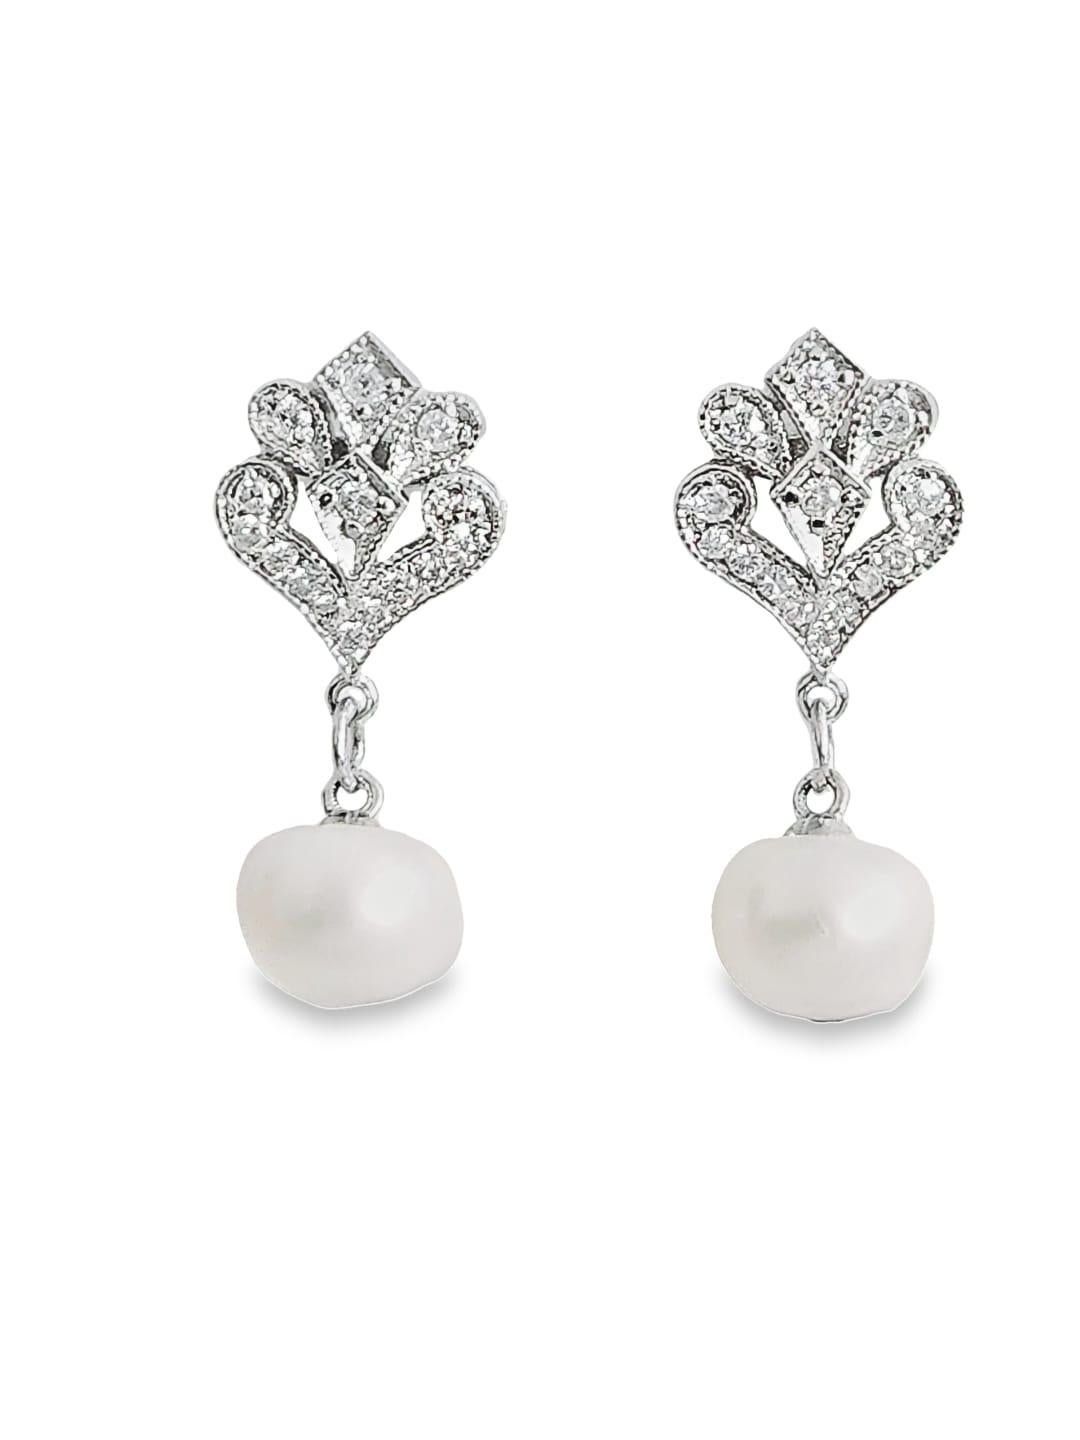 Round Cut Pearls Earrings with Diamonds  For Sale